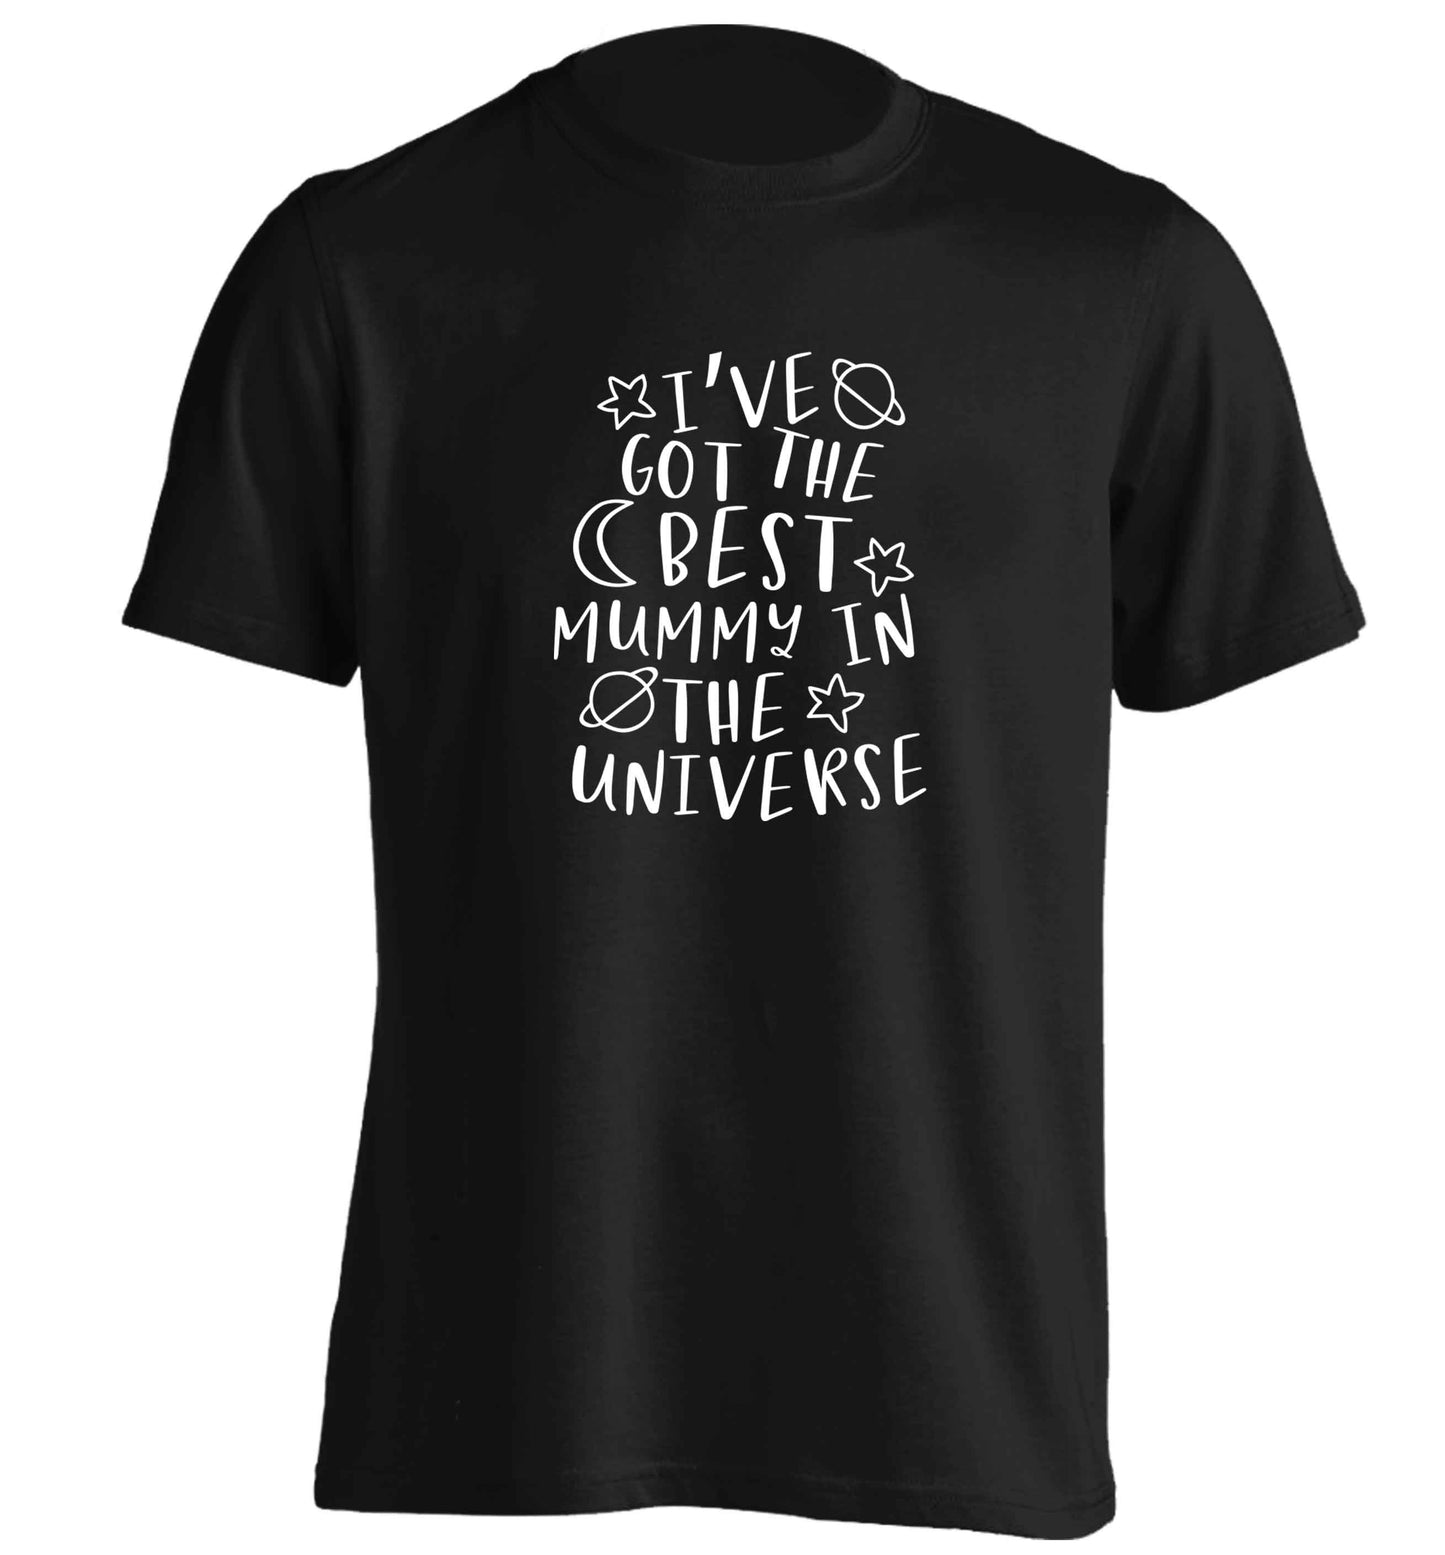 I've got the best mummy in the universe adults unisex black Tshirt 2XL